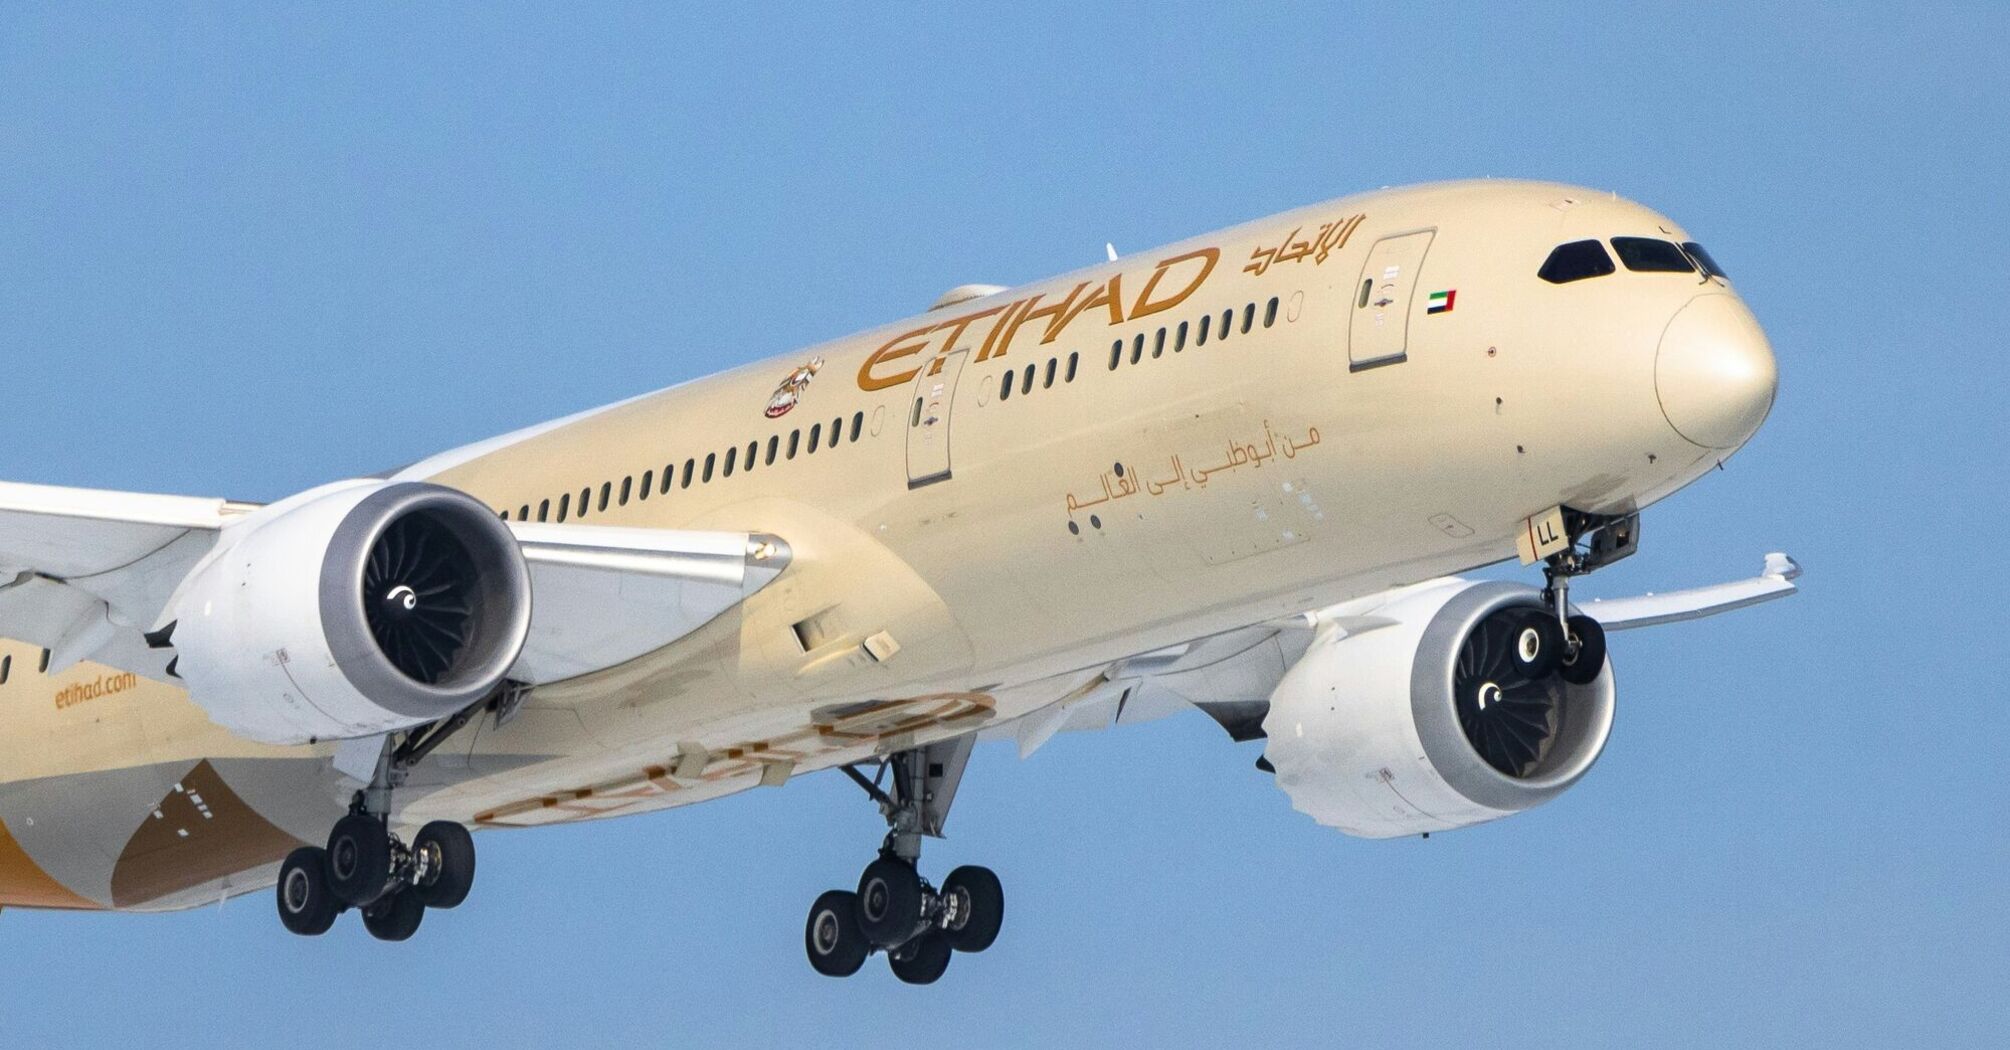 An Etihad Airways aircraft in mid-flight, with landing gear extended and the golden livery featuring the airline's name both in English and Arabic script